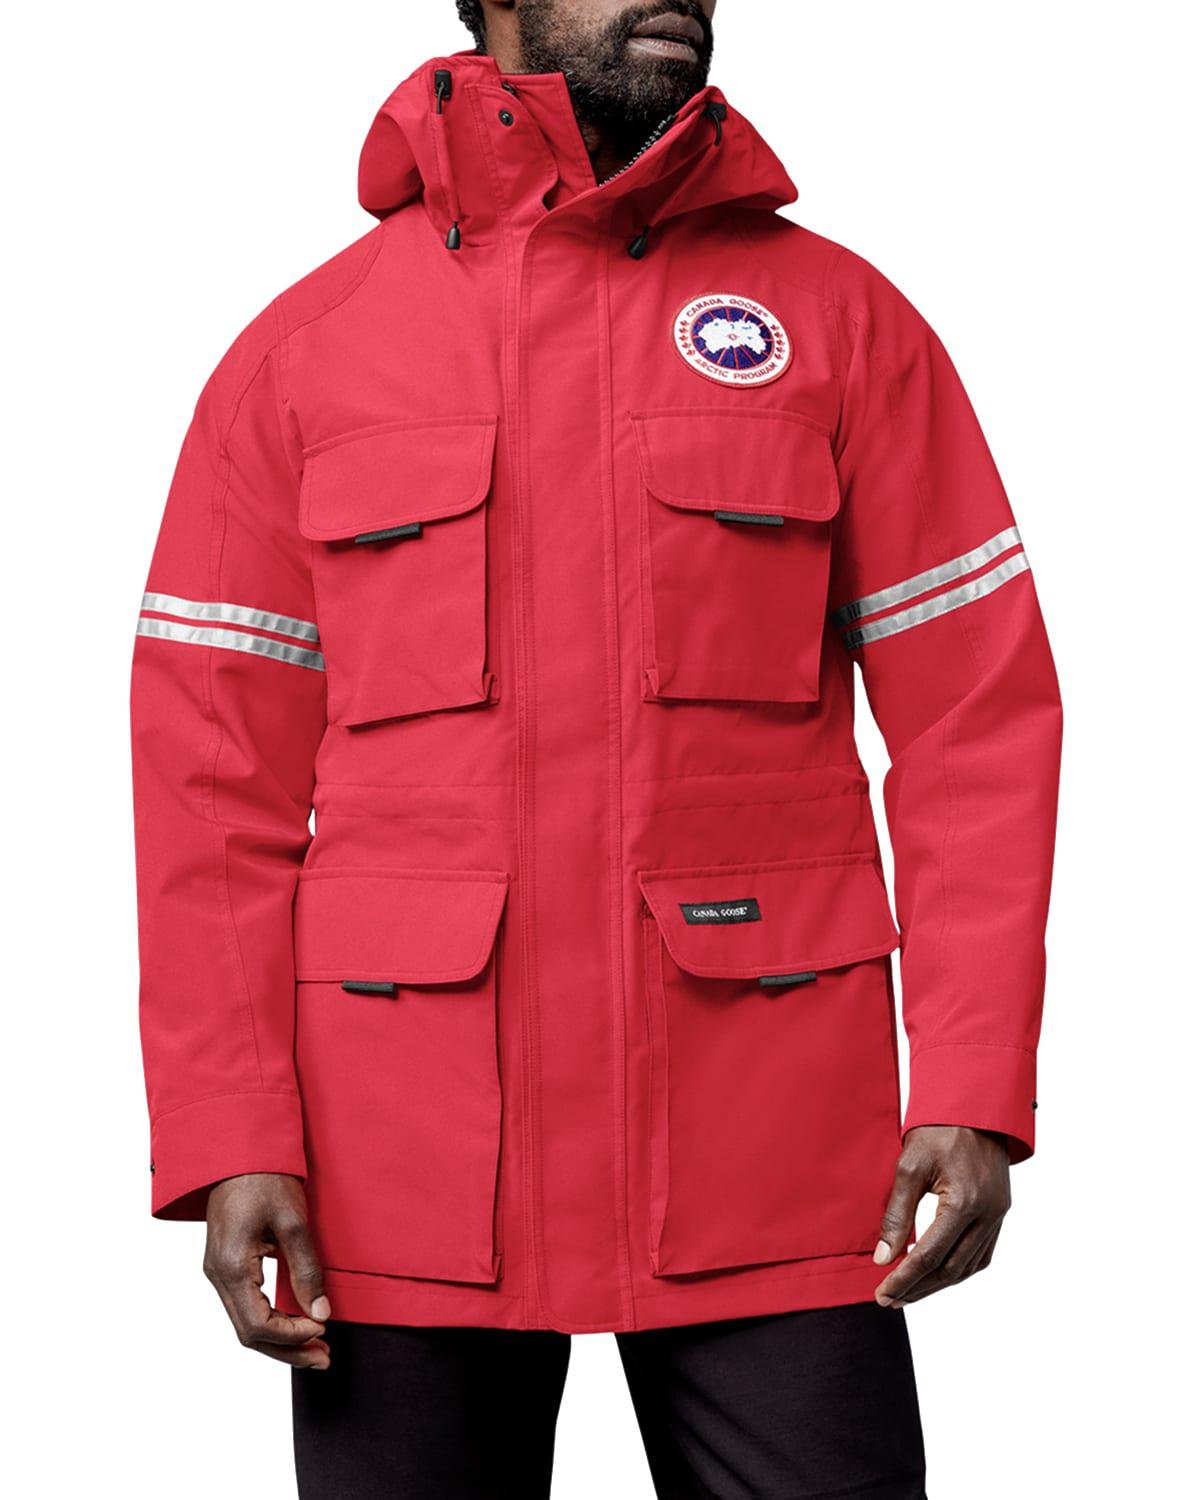 Men's Science Research Jacket by CANADA GOOSE | jellibeans